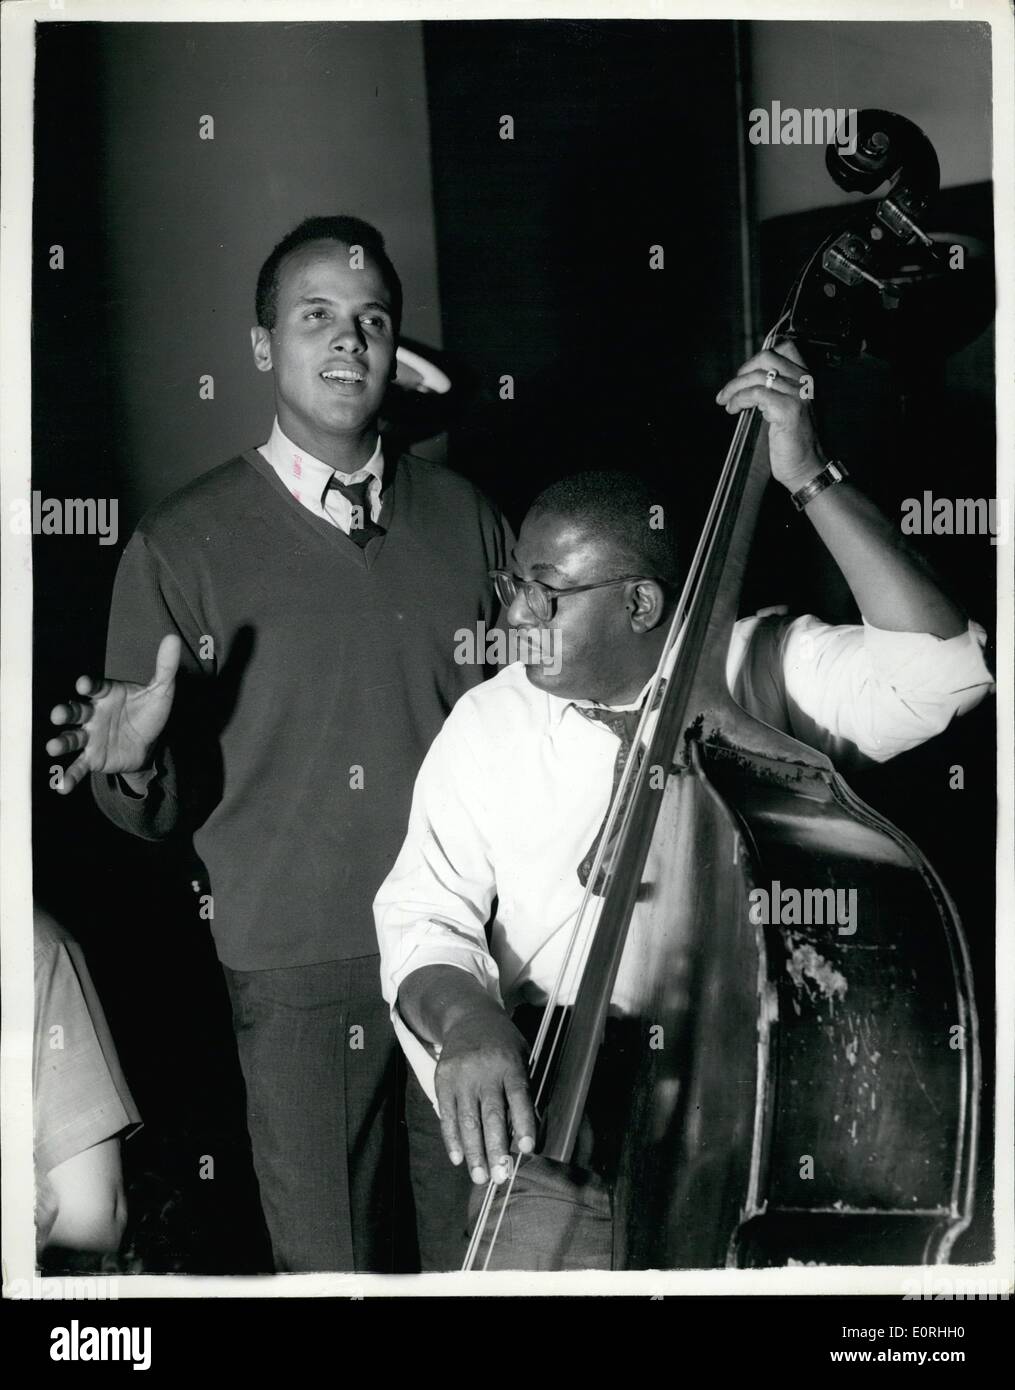 Sep. 09, 1959 - Harry Belafonte rehearses for his B.B.C. television program next Sunday: Harry Belafonte, the distinguished American artist, makes his third appearance on B.B.C. television in a 45-minute program of Music and song on Sunday Sept. 20th . Today he was busy rehearsing for the show. Photo shows Harry Belafonte is accompanied by Norman Keenan on his bass during the rehearsals at the B.B.C. Riverside Studios, Hammersmith, today. Stock Photo